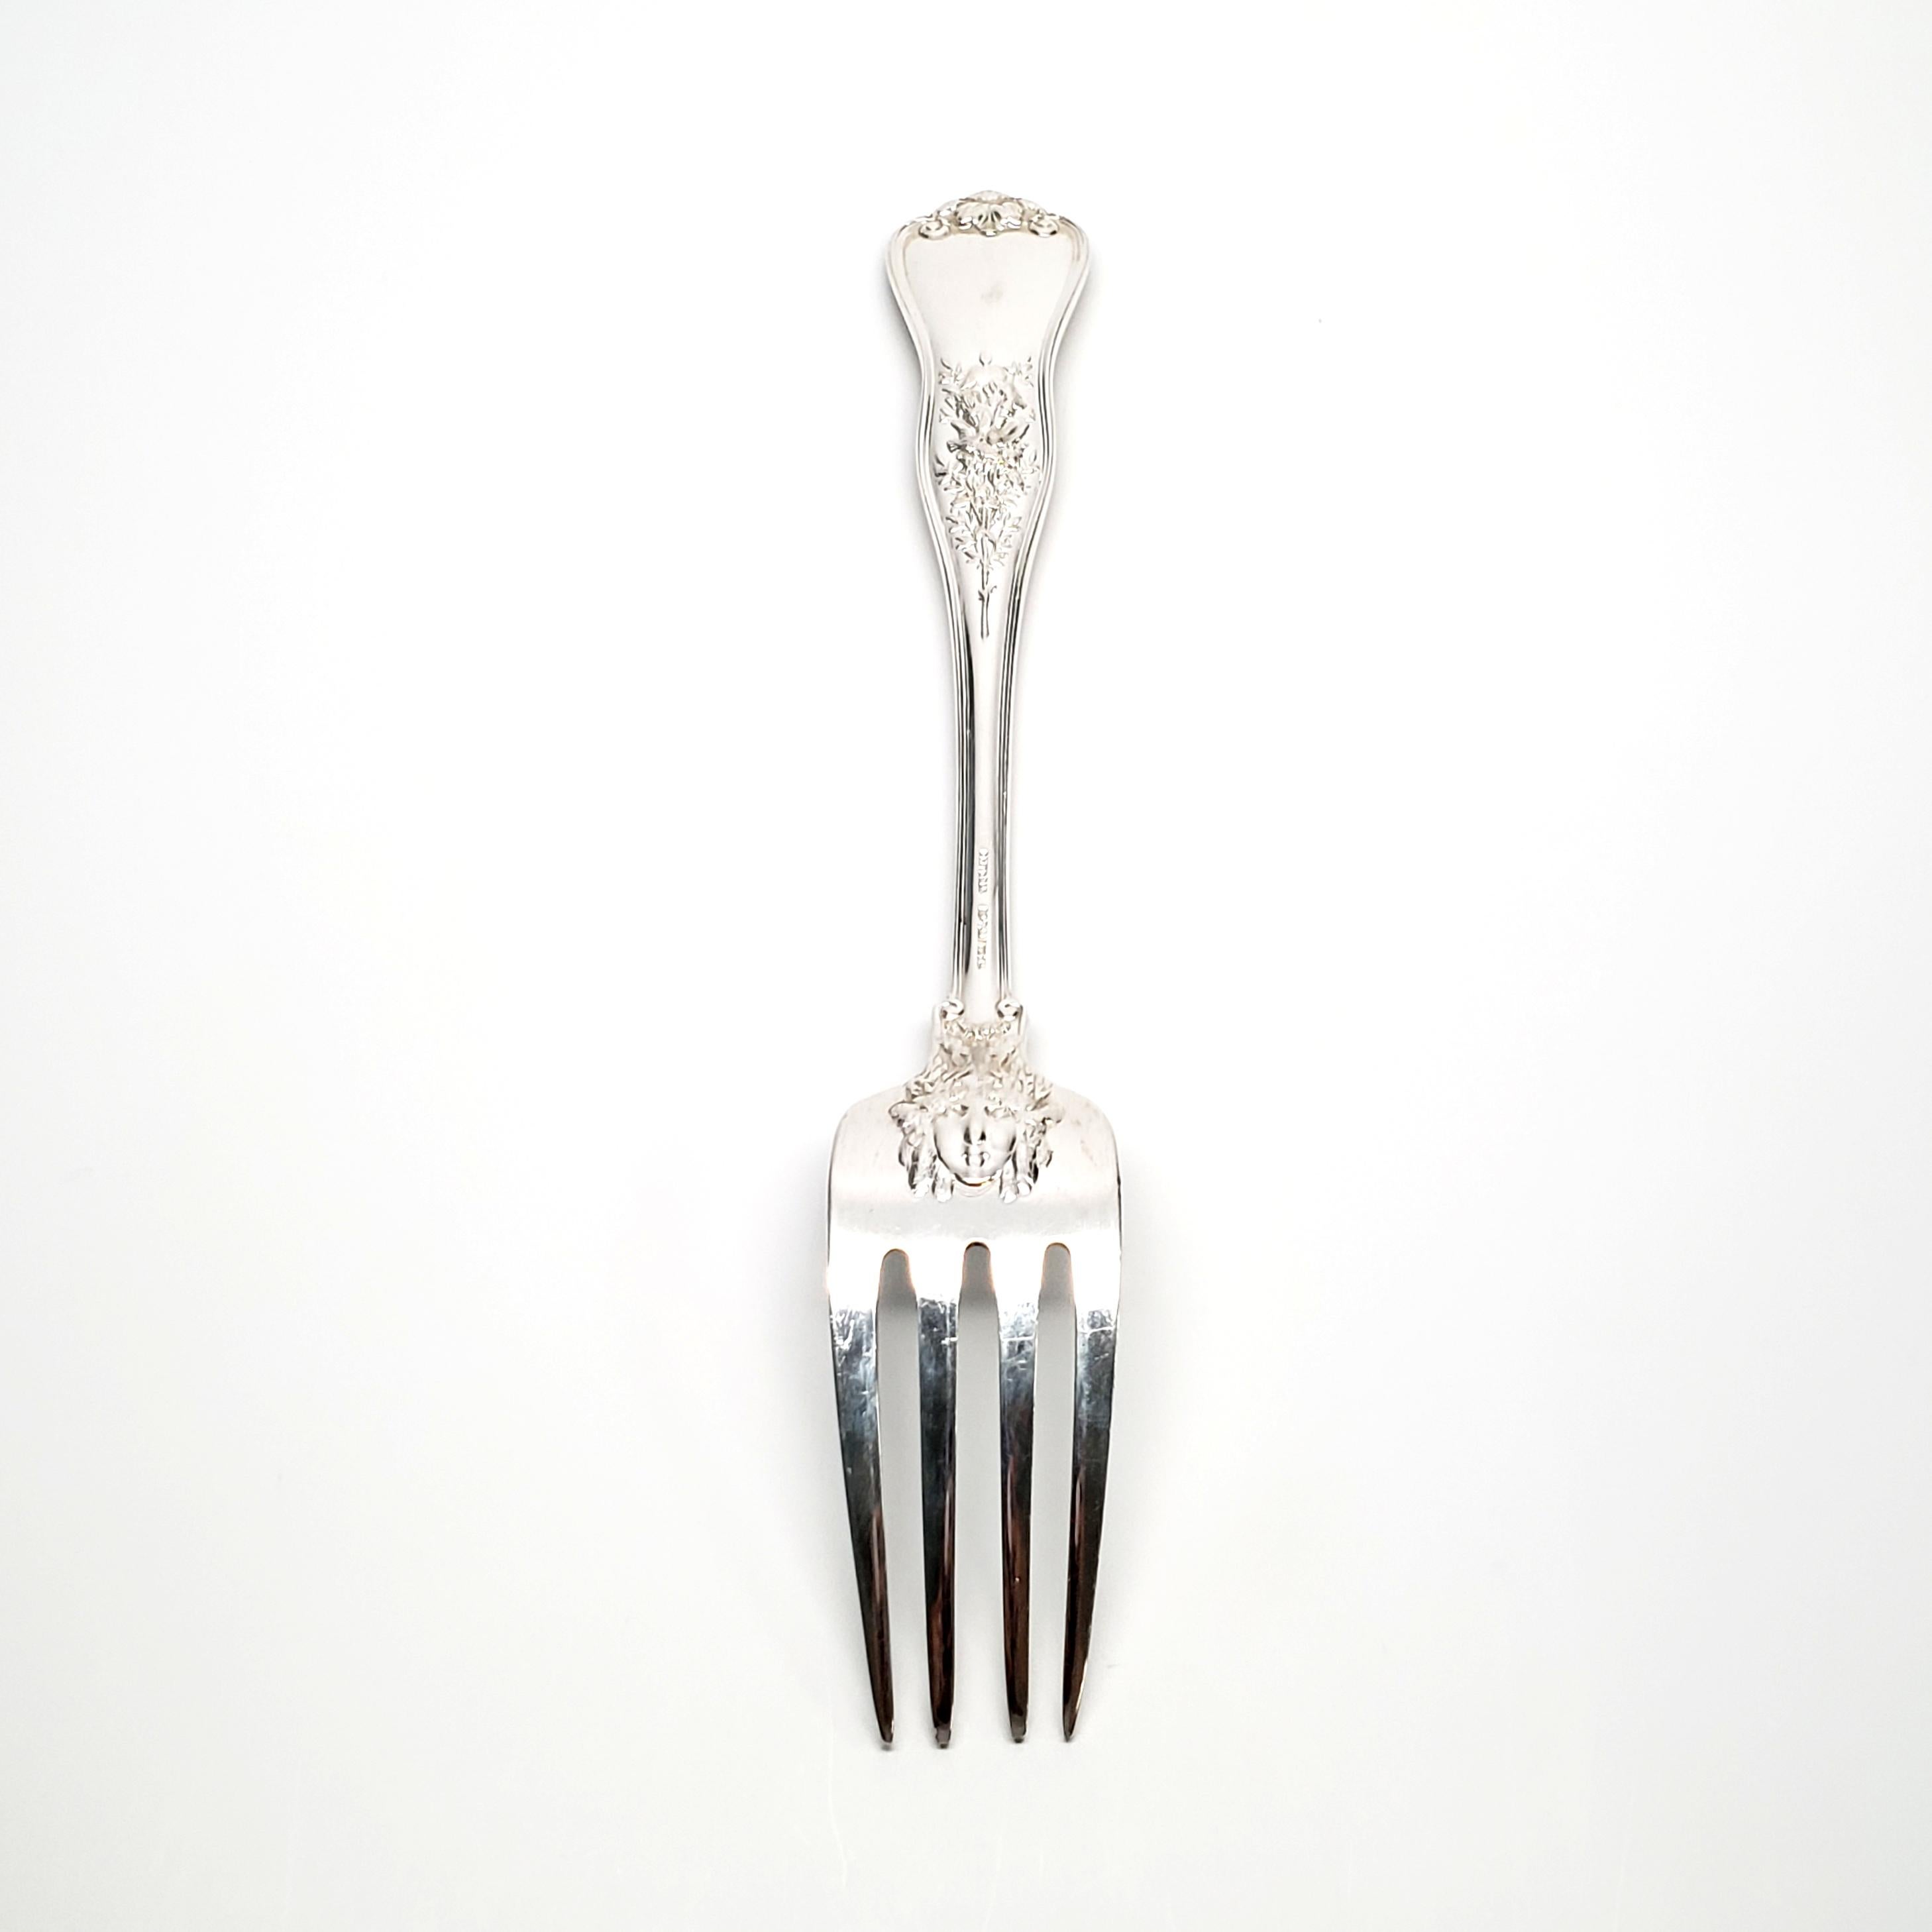 Vintage Tiffany & Co. sterling silver serving fork in the Olympian 1878 pattern.

Olympian is an ornate and elaborate multi-motif pattern, featuring 17 different sharply carved handle decorations depicting scenes from Classical Mythology.